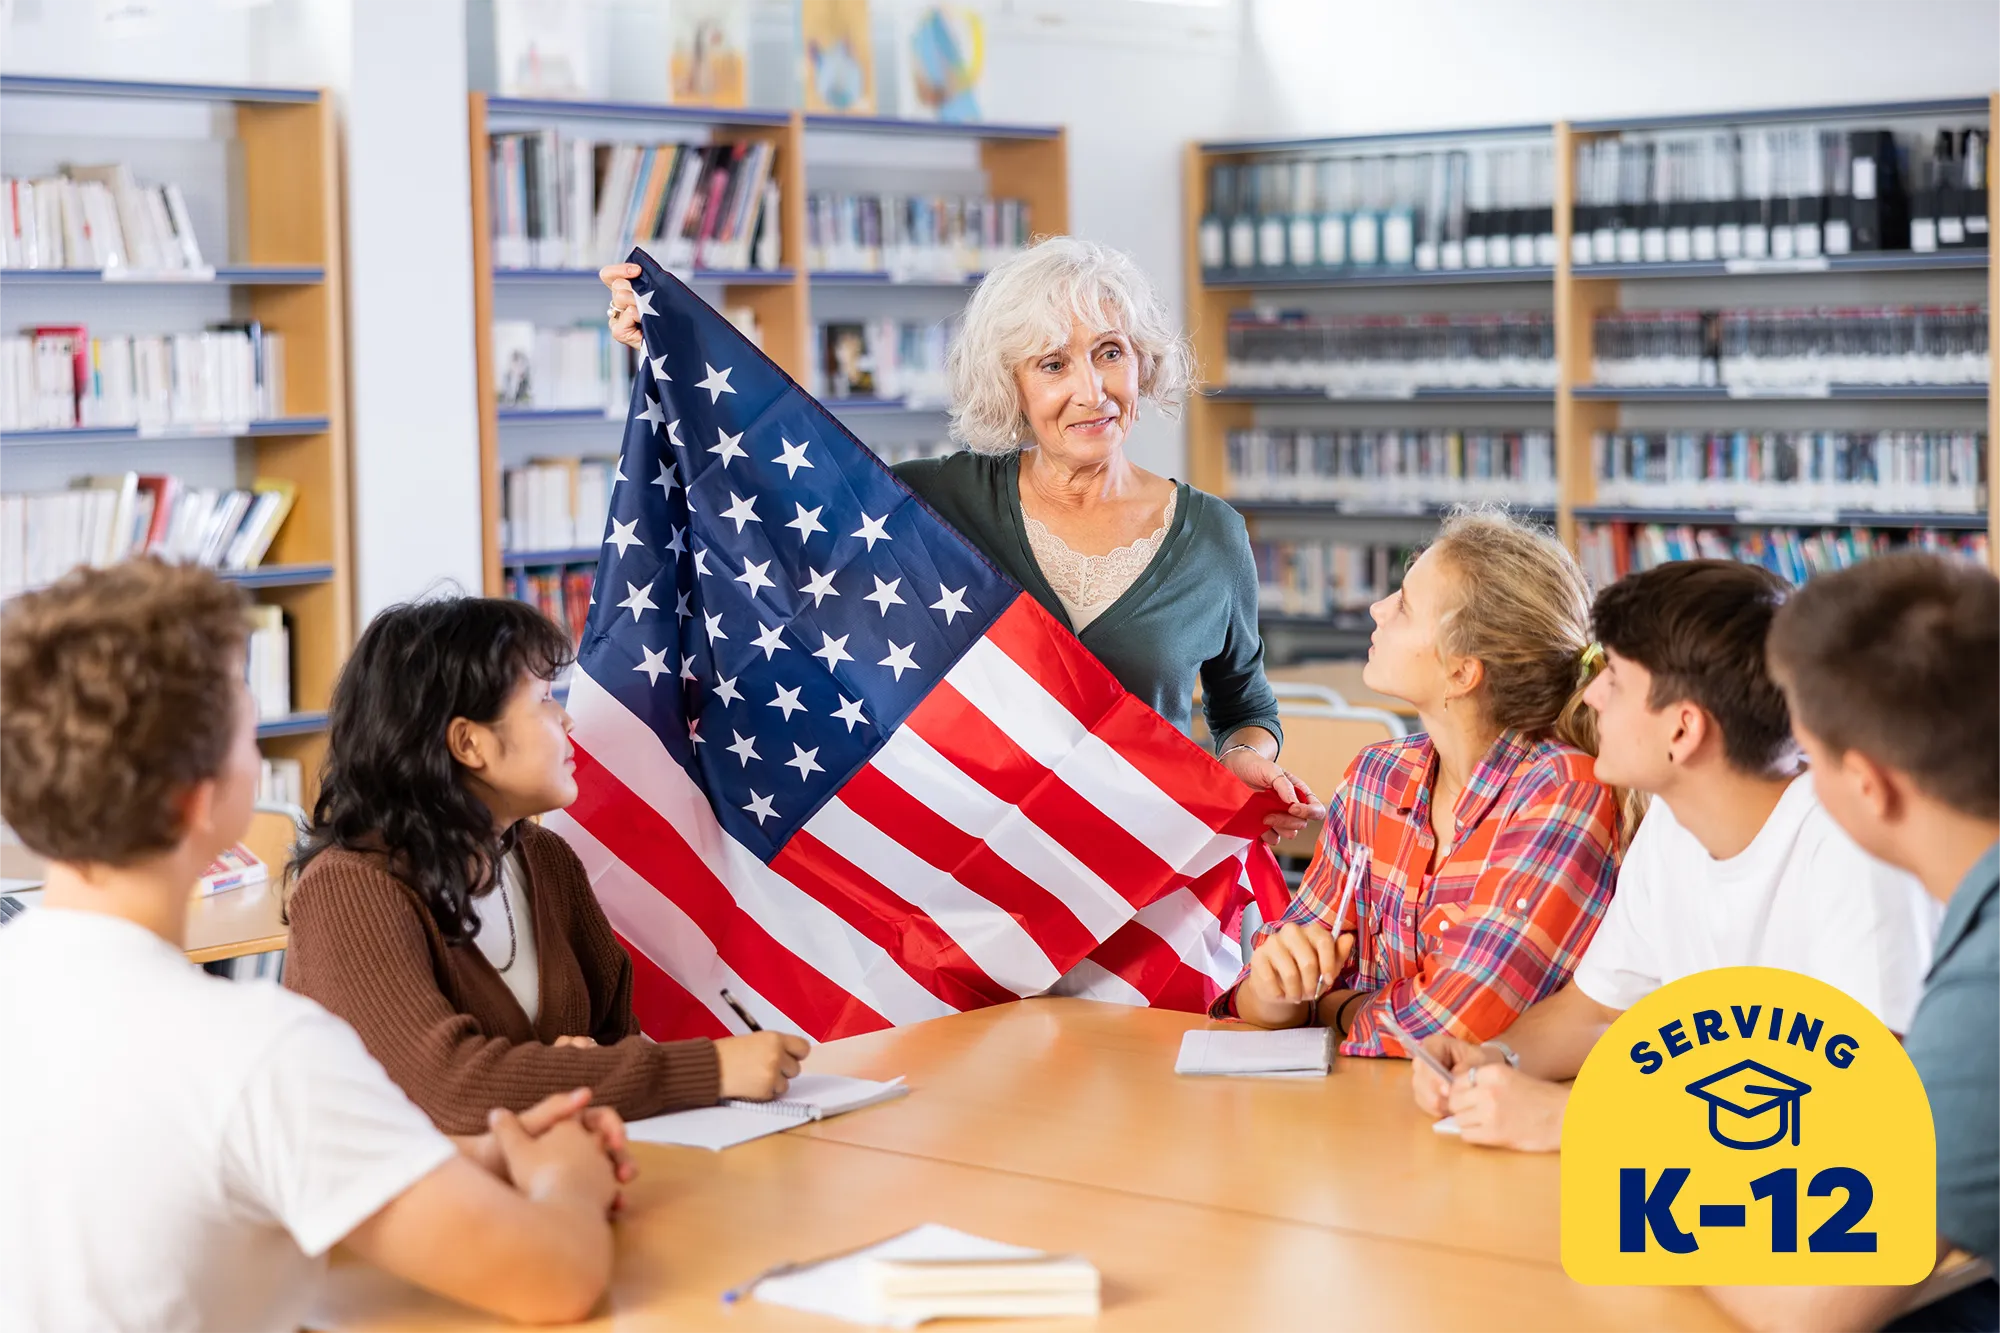 older historian teacher unfolding the American Flag to show her students